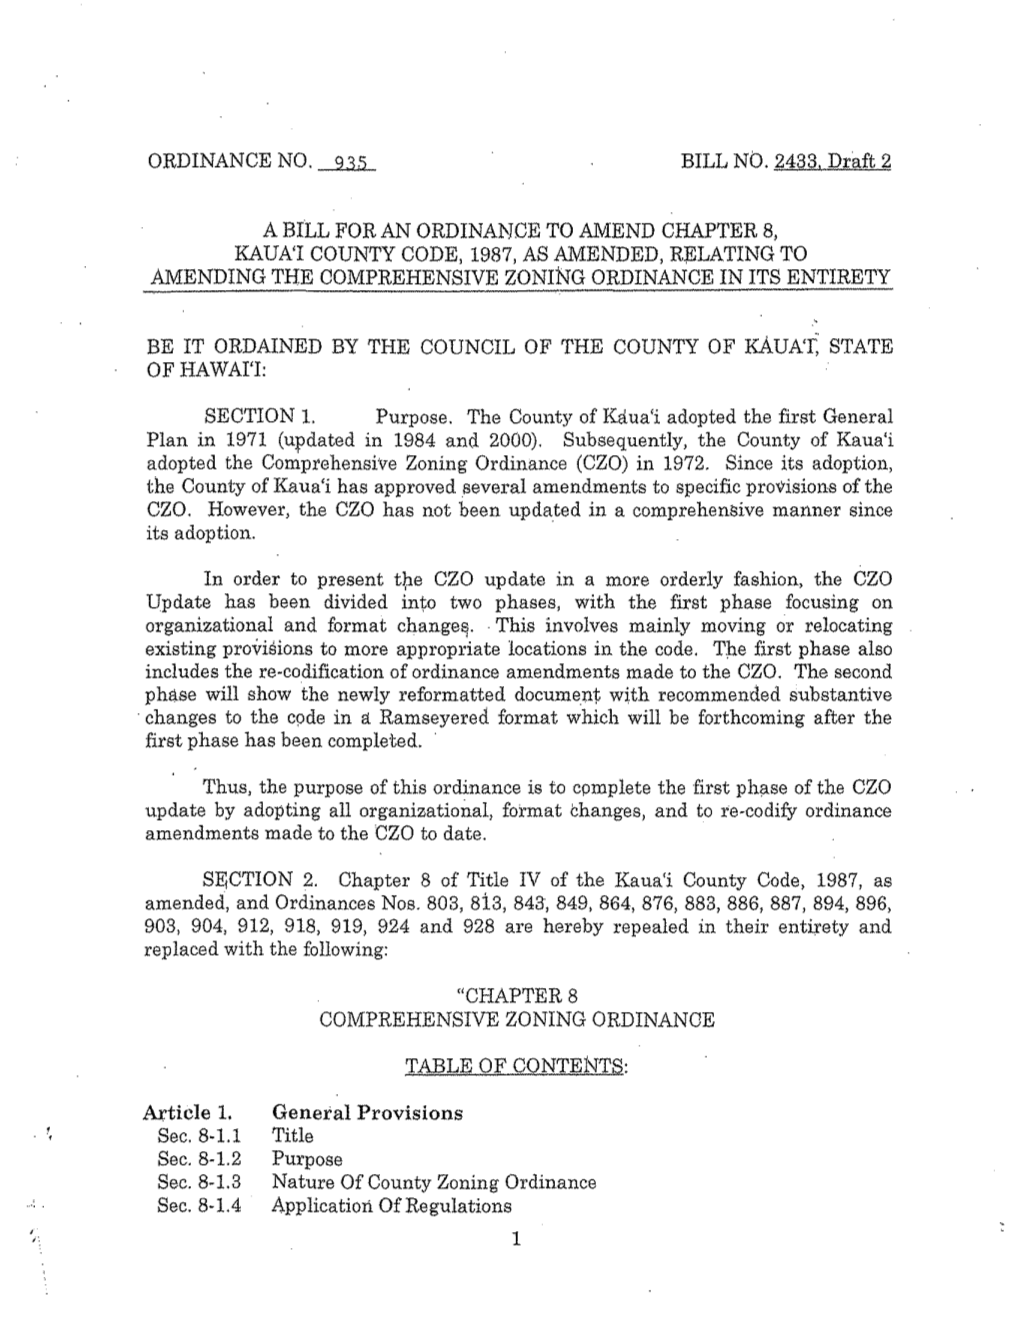 ORDINANCE NO. 93,5 BILL NO. 2433. Draft 2 a BILL for an ORDINANCE to AMEND CHAPTER 8, KAUA'i COUNTY CODE, 1987, AS AMENDED, RELA